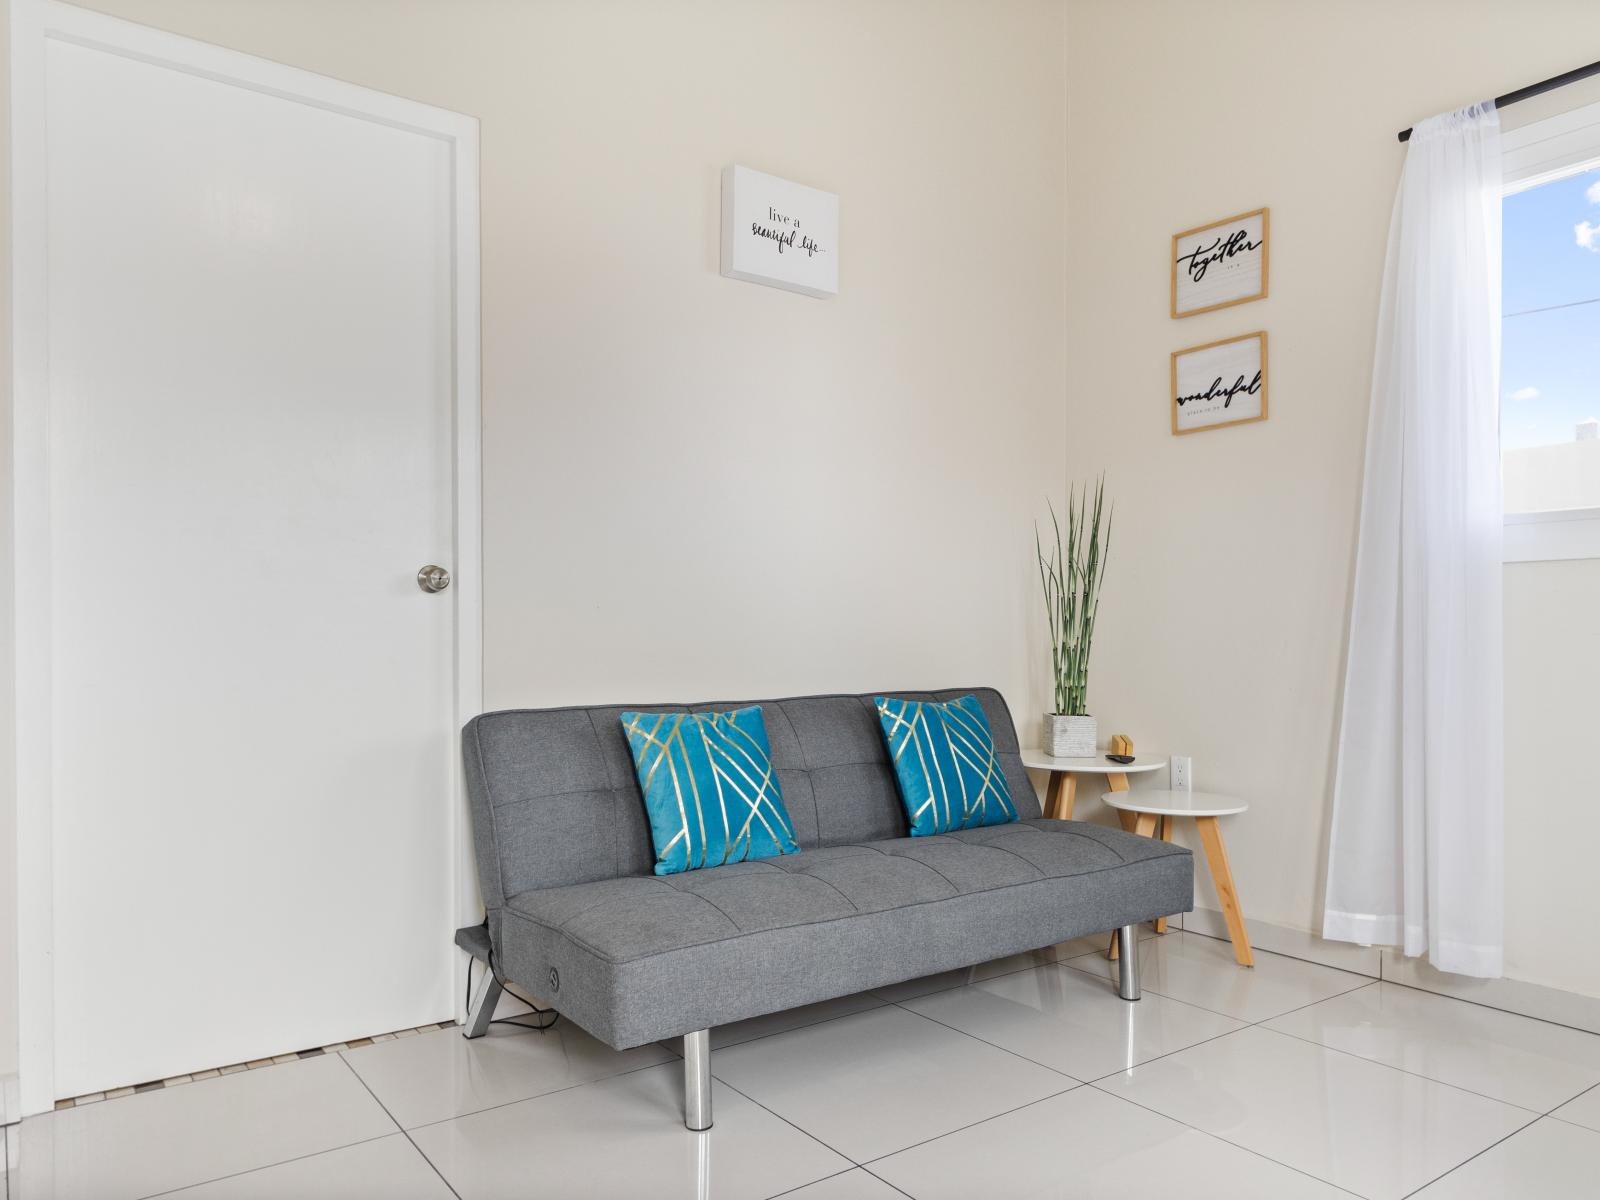 Exclusive living area of the apartment in Noord, Aruba - Cosy sofas - Beautifully located windows of the apartment with outside views - Beautifully decored with wall paintings - Availability of TV and Netflix